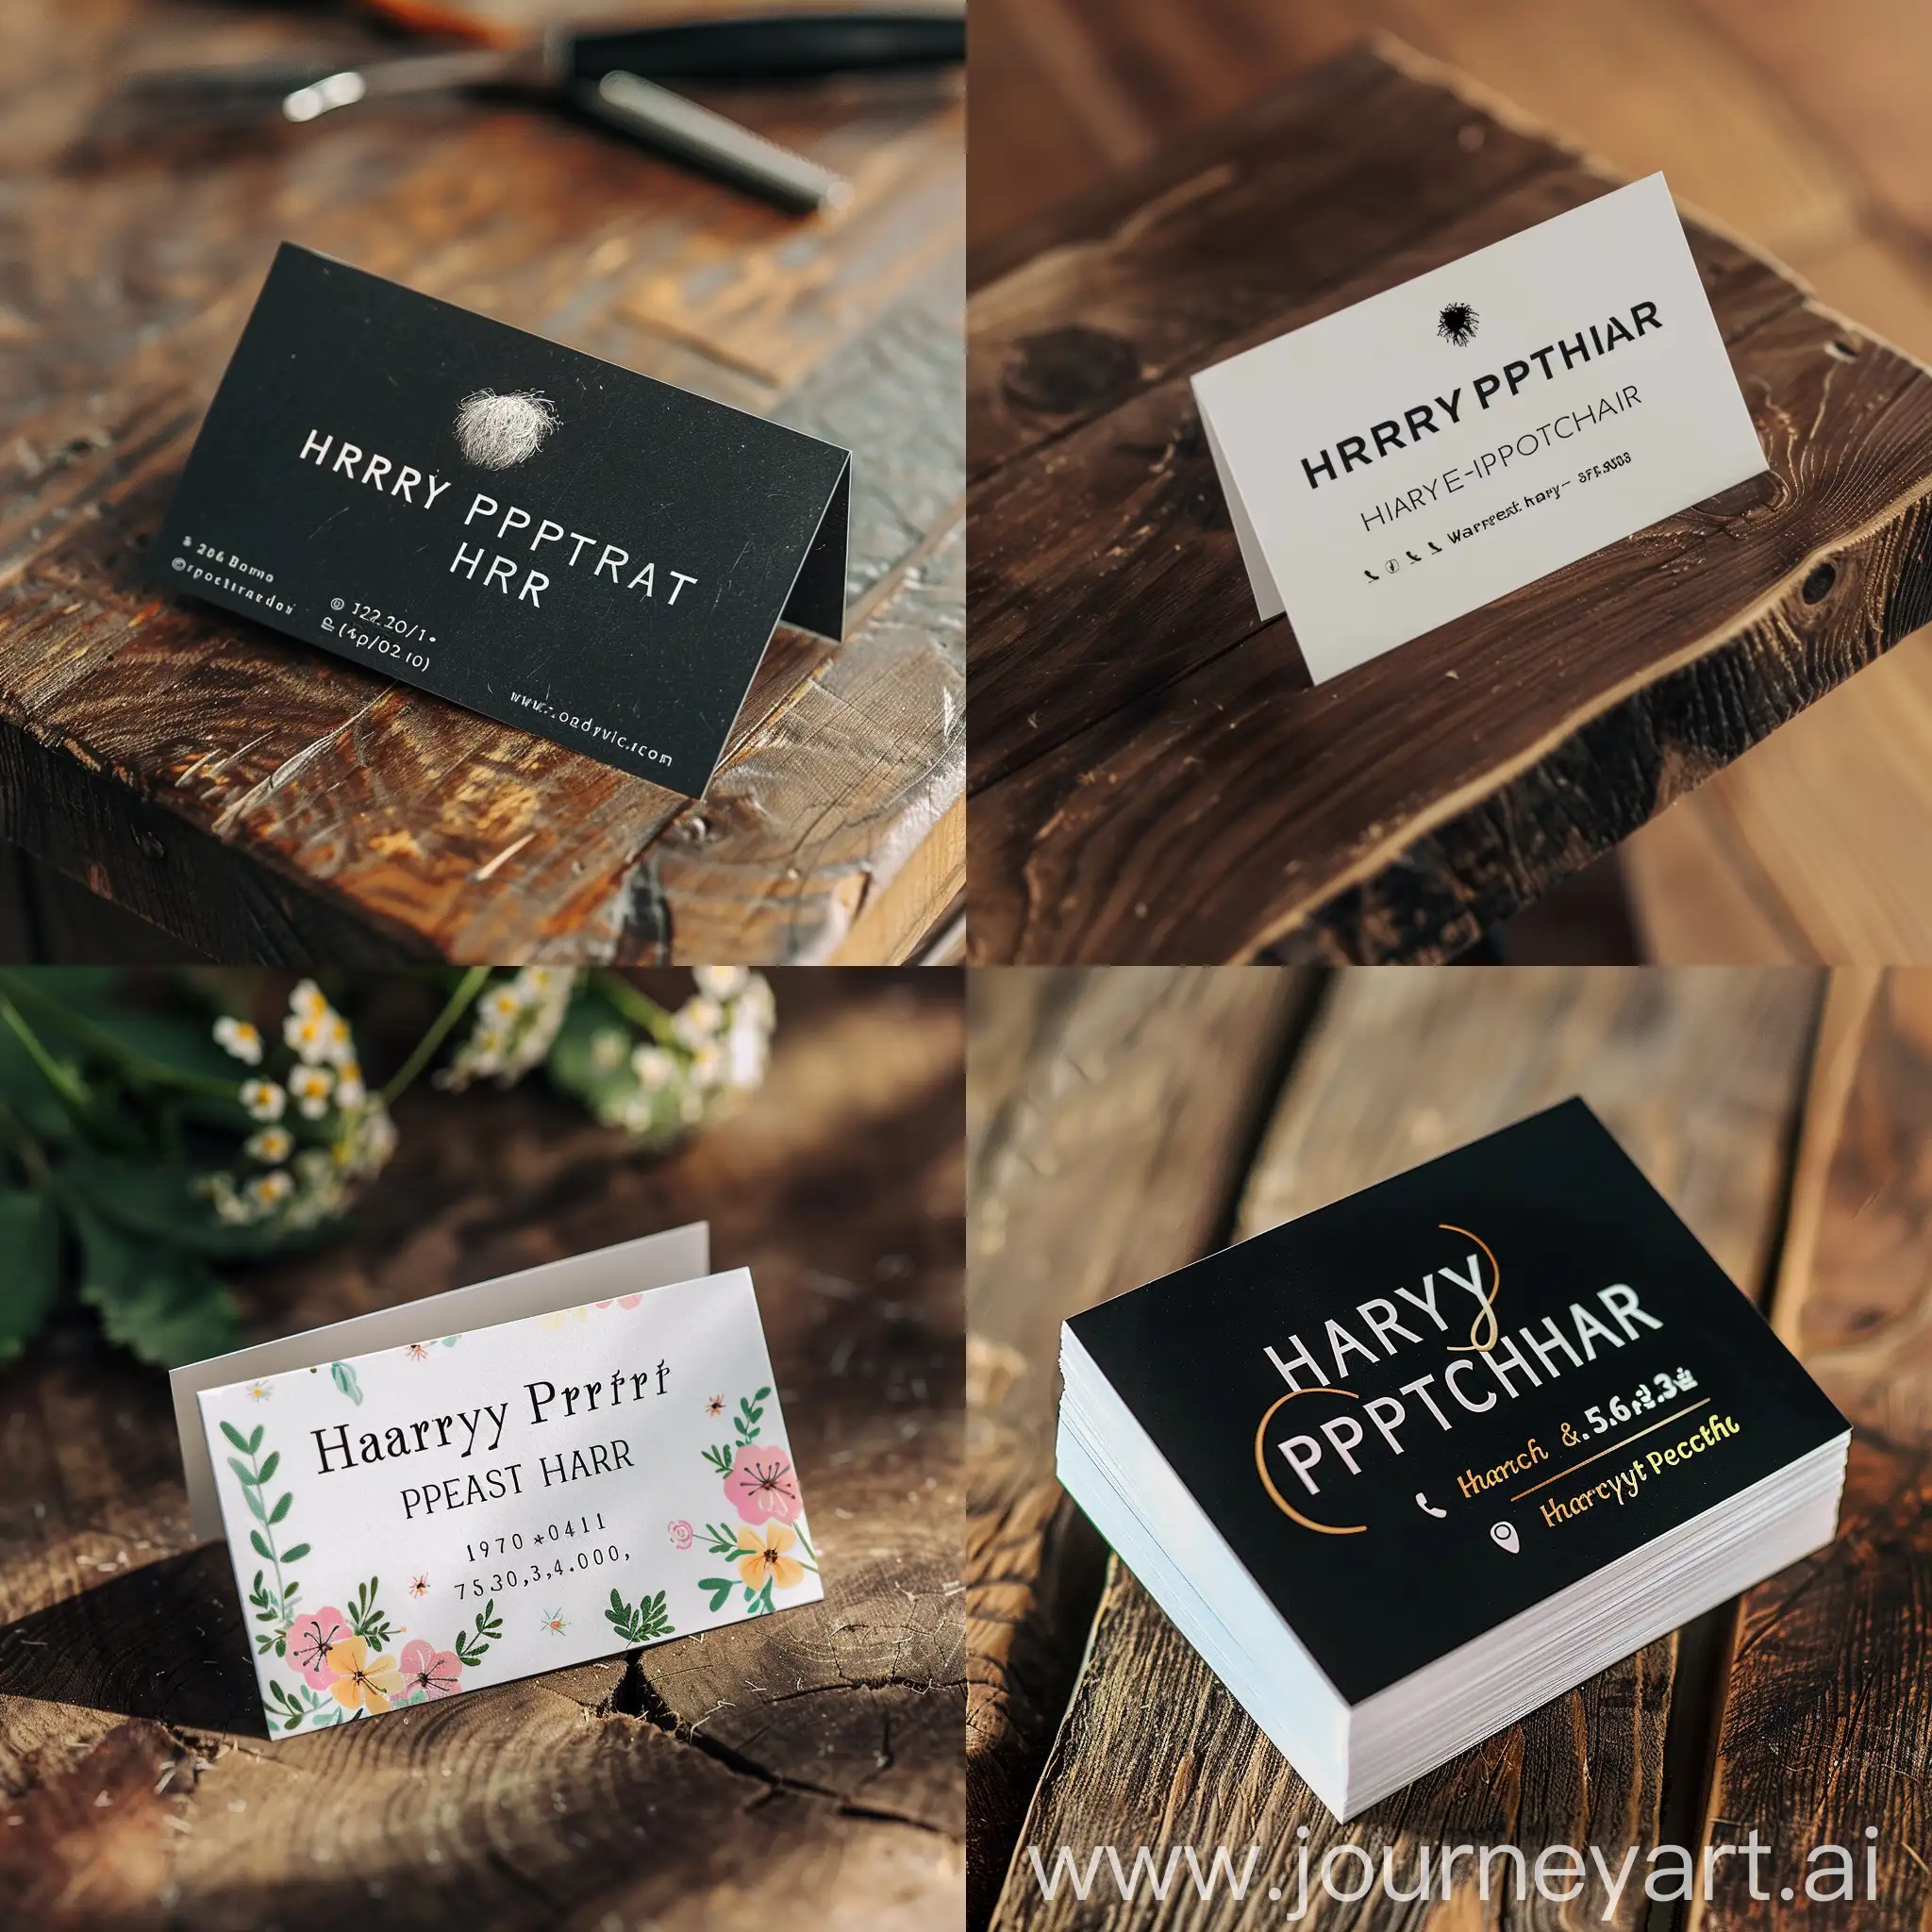 business card for haircut salon with name "Harry Perfect Hair"